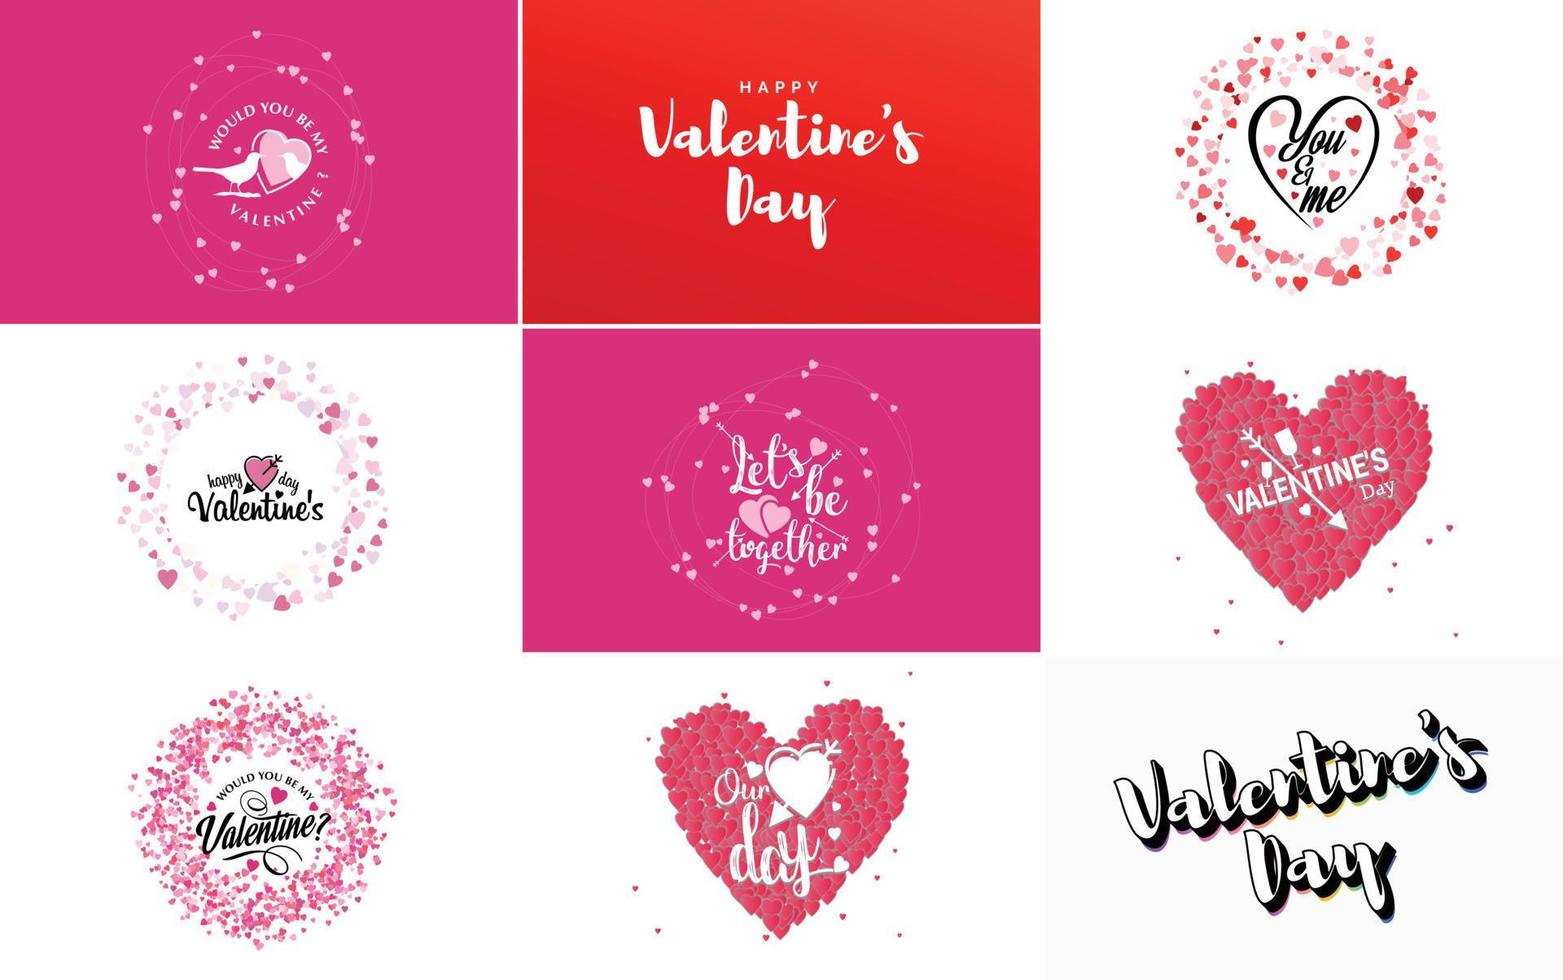 Happy Valentine's Day typography poster with handwritten calligraphy text. isolated on white background vector illustration